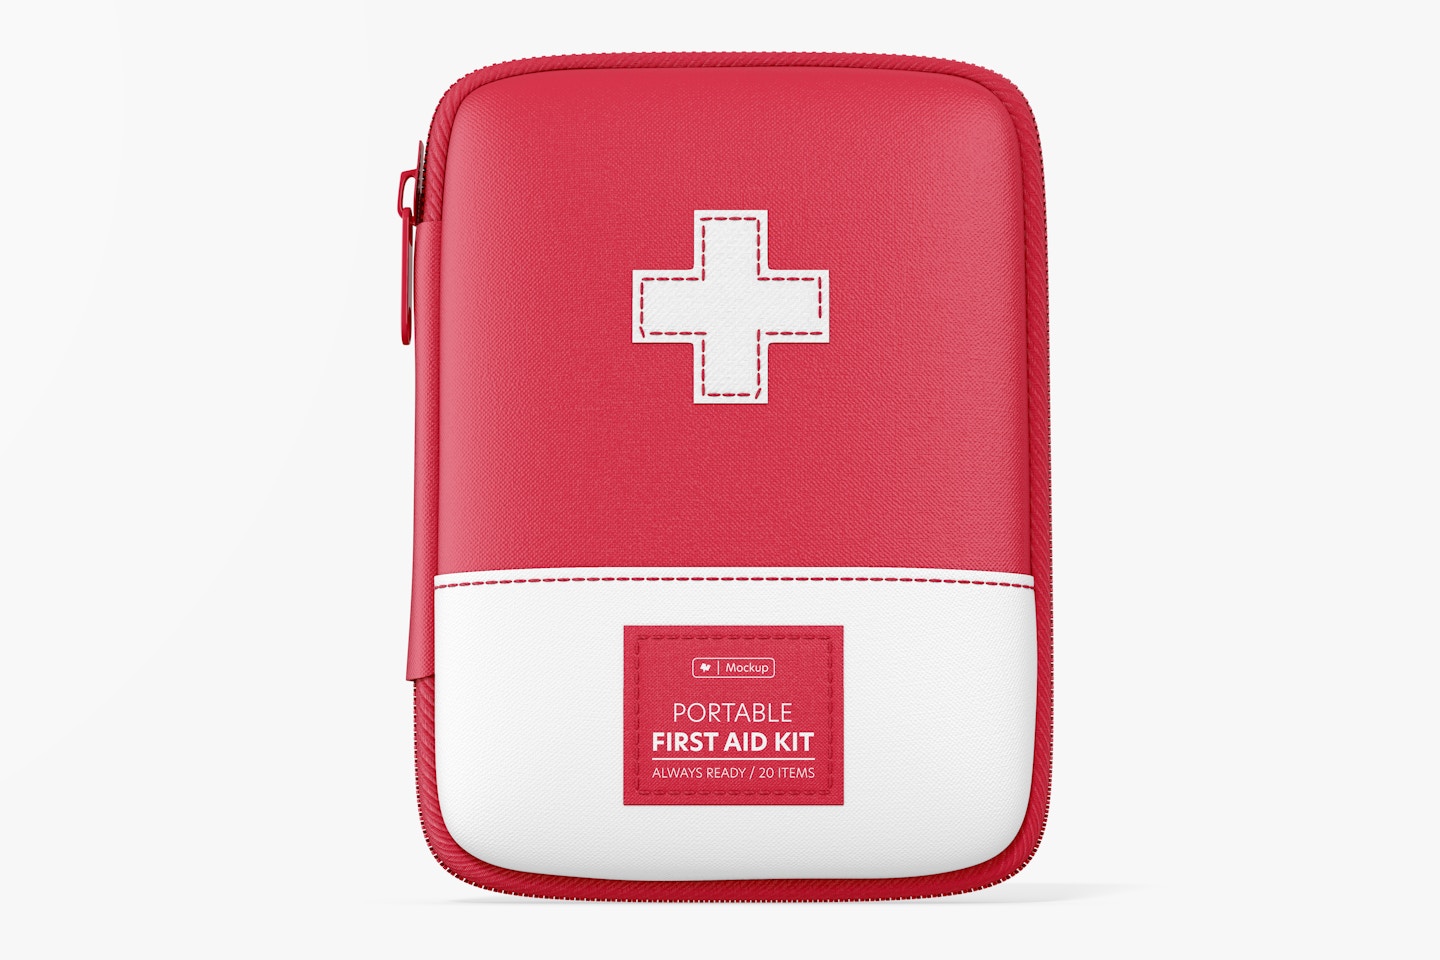 Portable First Aid Kit Mockup, Front View